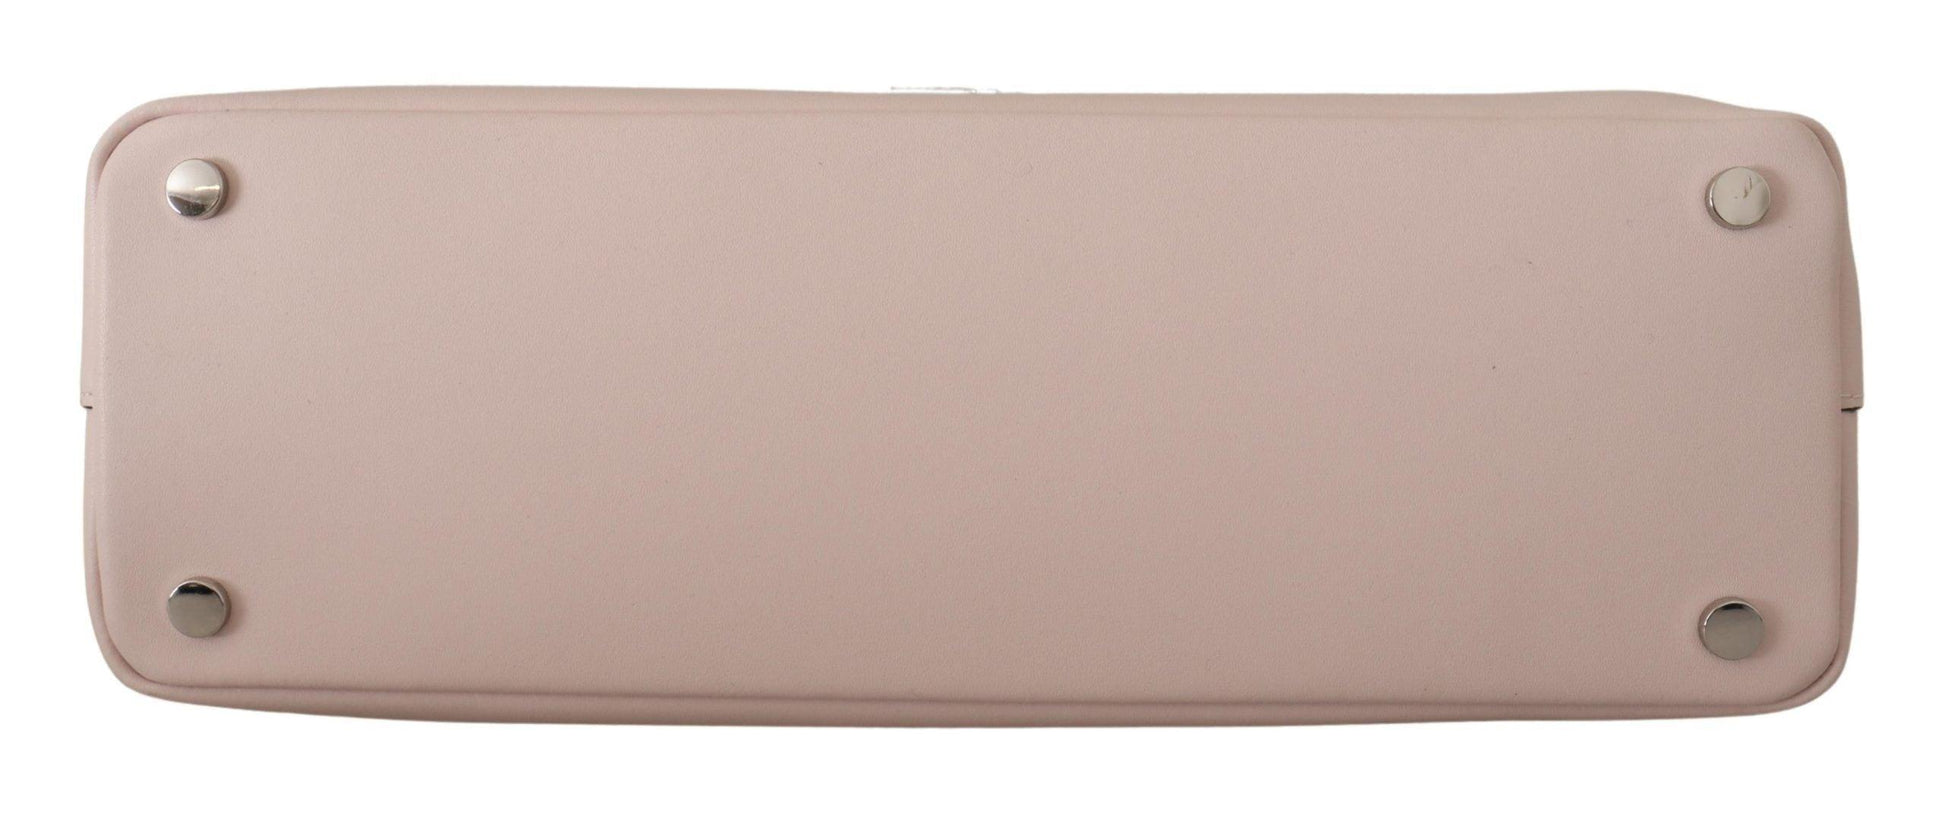 Karl Lagerfeld Light Pink Mauve Leather Shoulder Bag - Designed by Karl Lagerfeld Available to Buy at a Discounted Price on Moon Behind The Hill Online Designer Discount Store